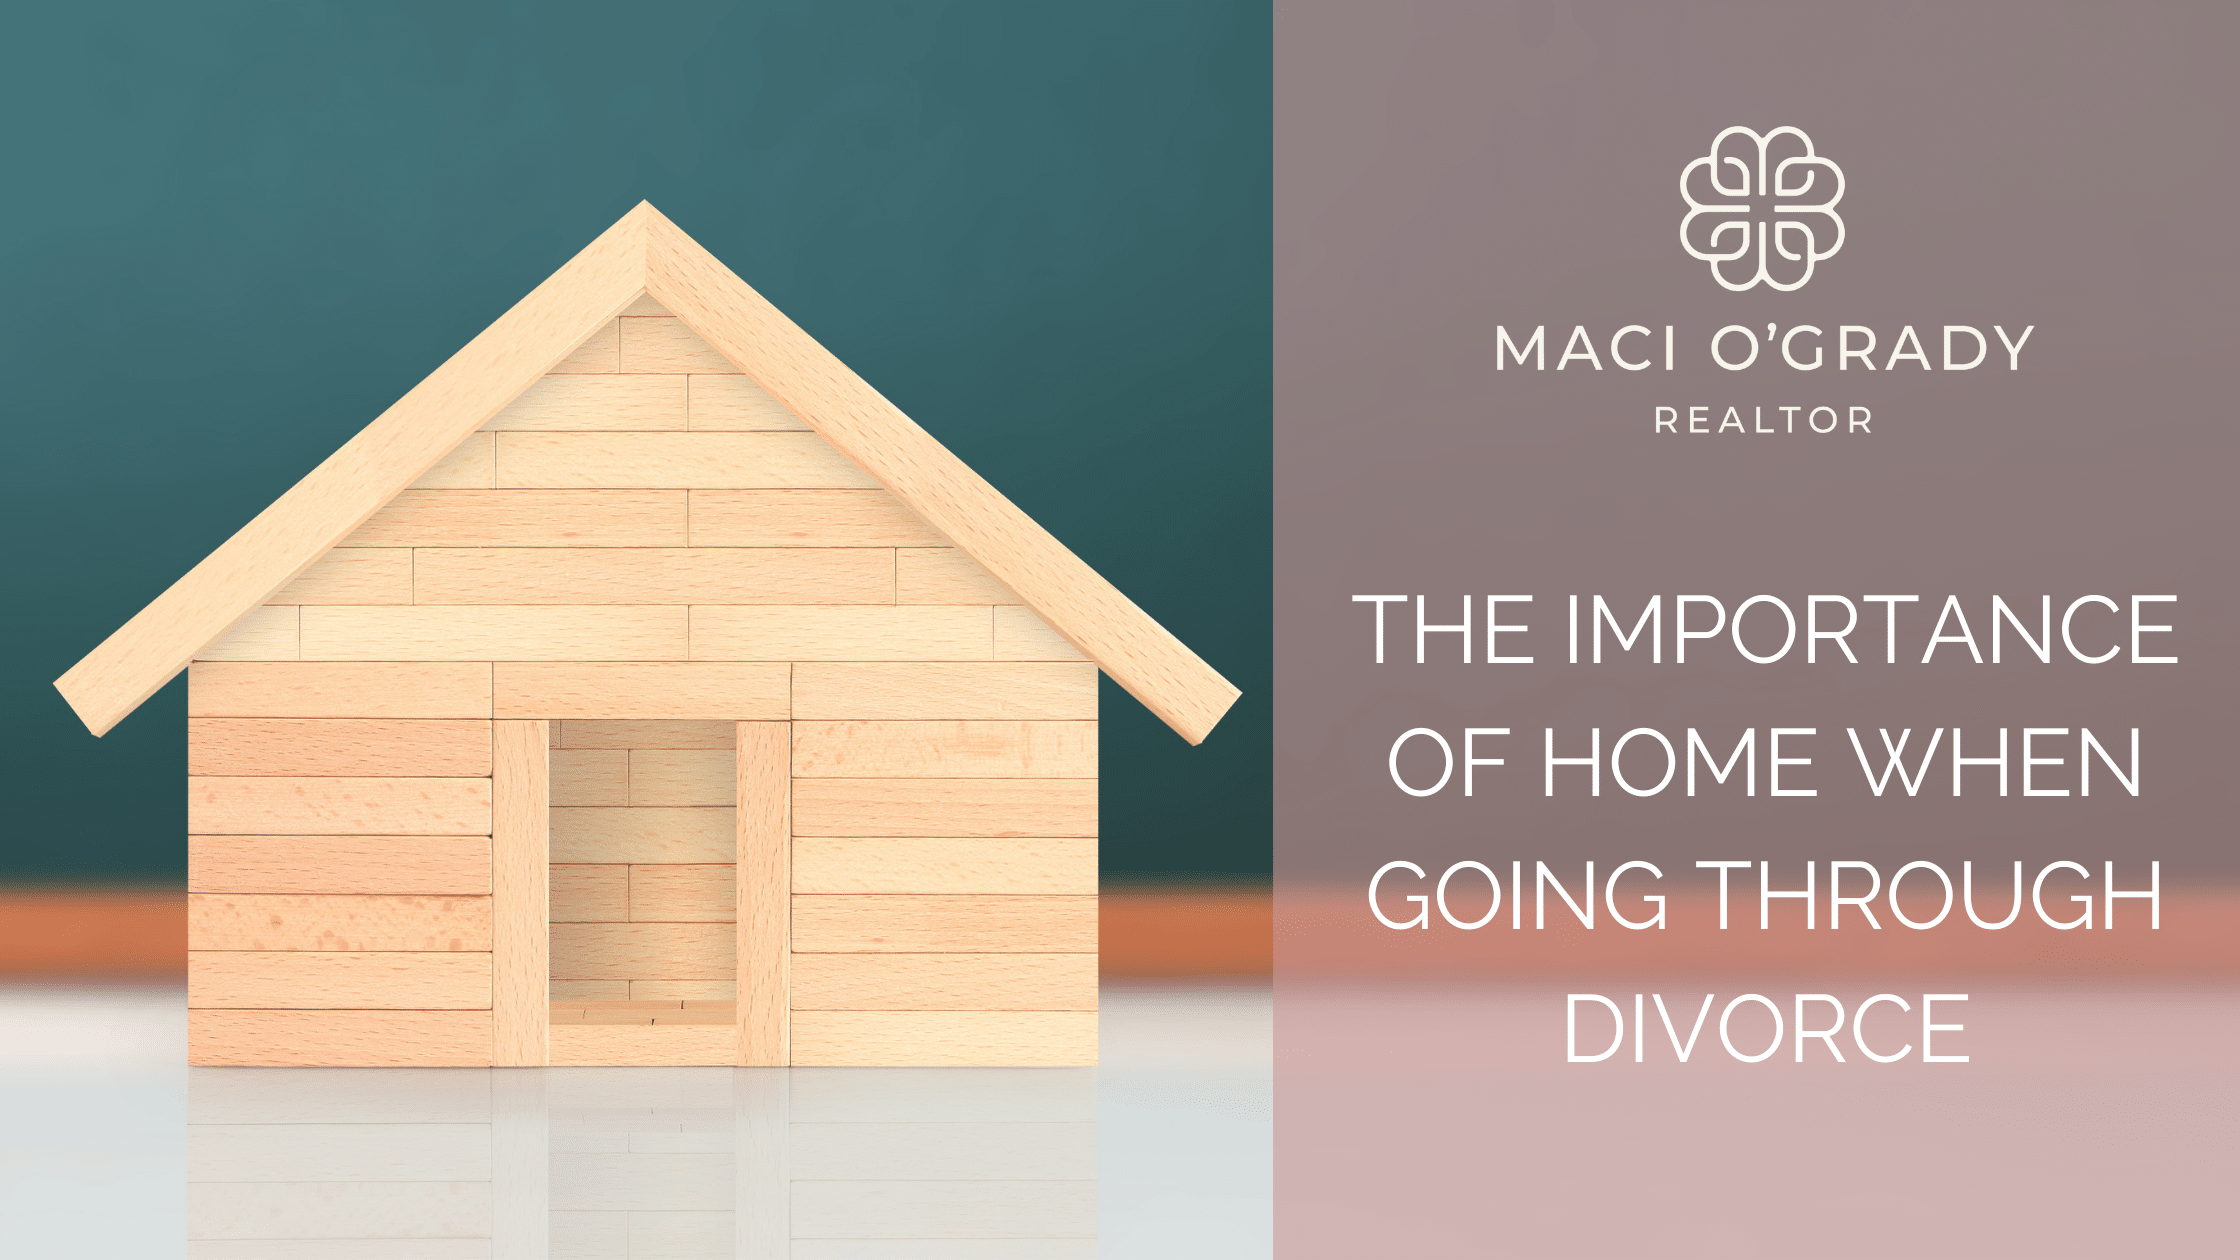 The importance of home when going through divorce